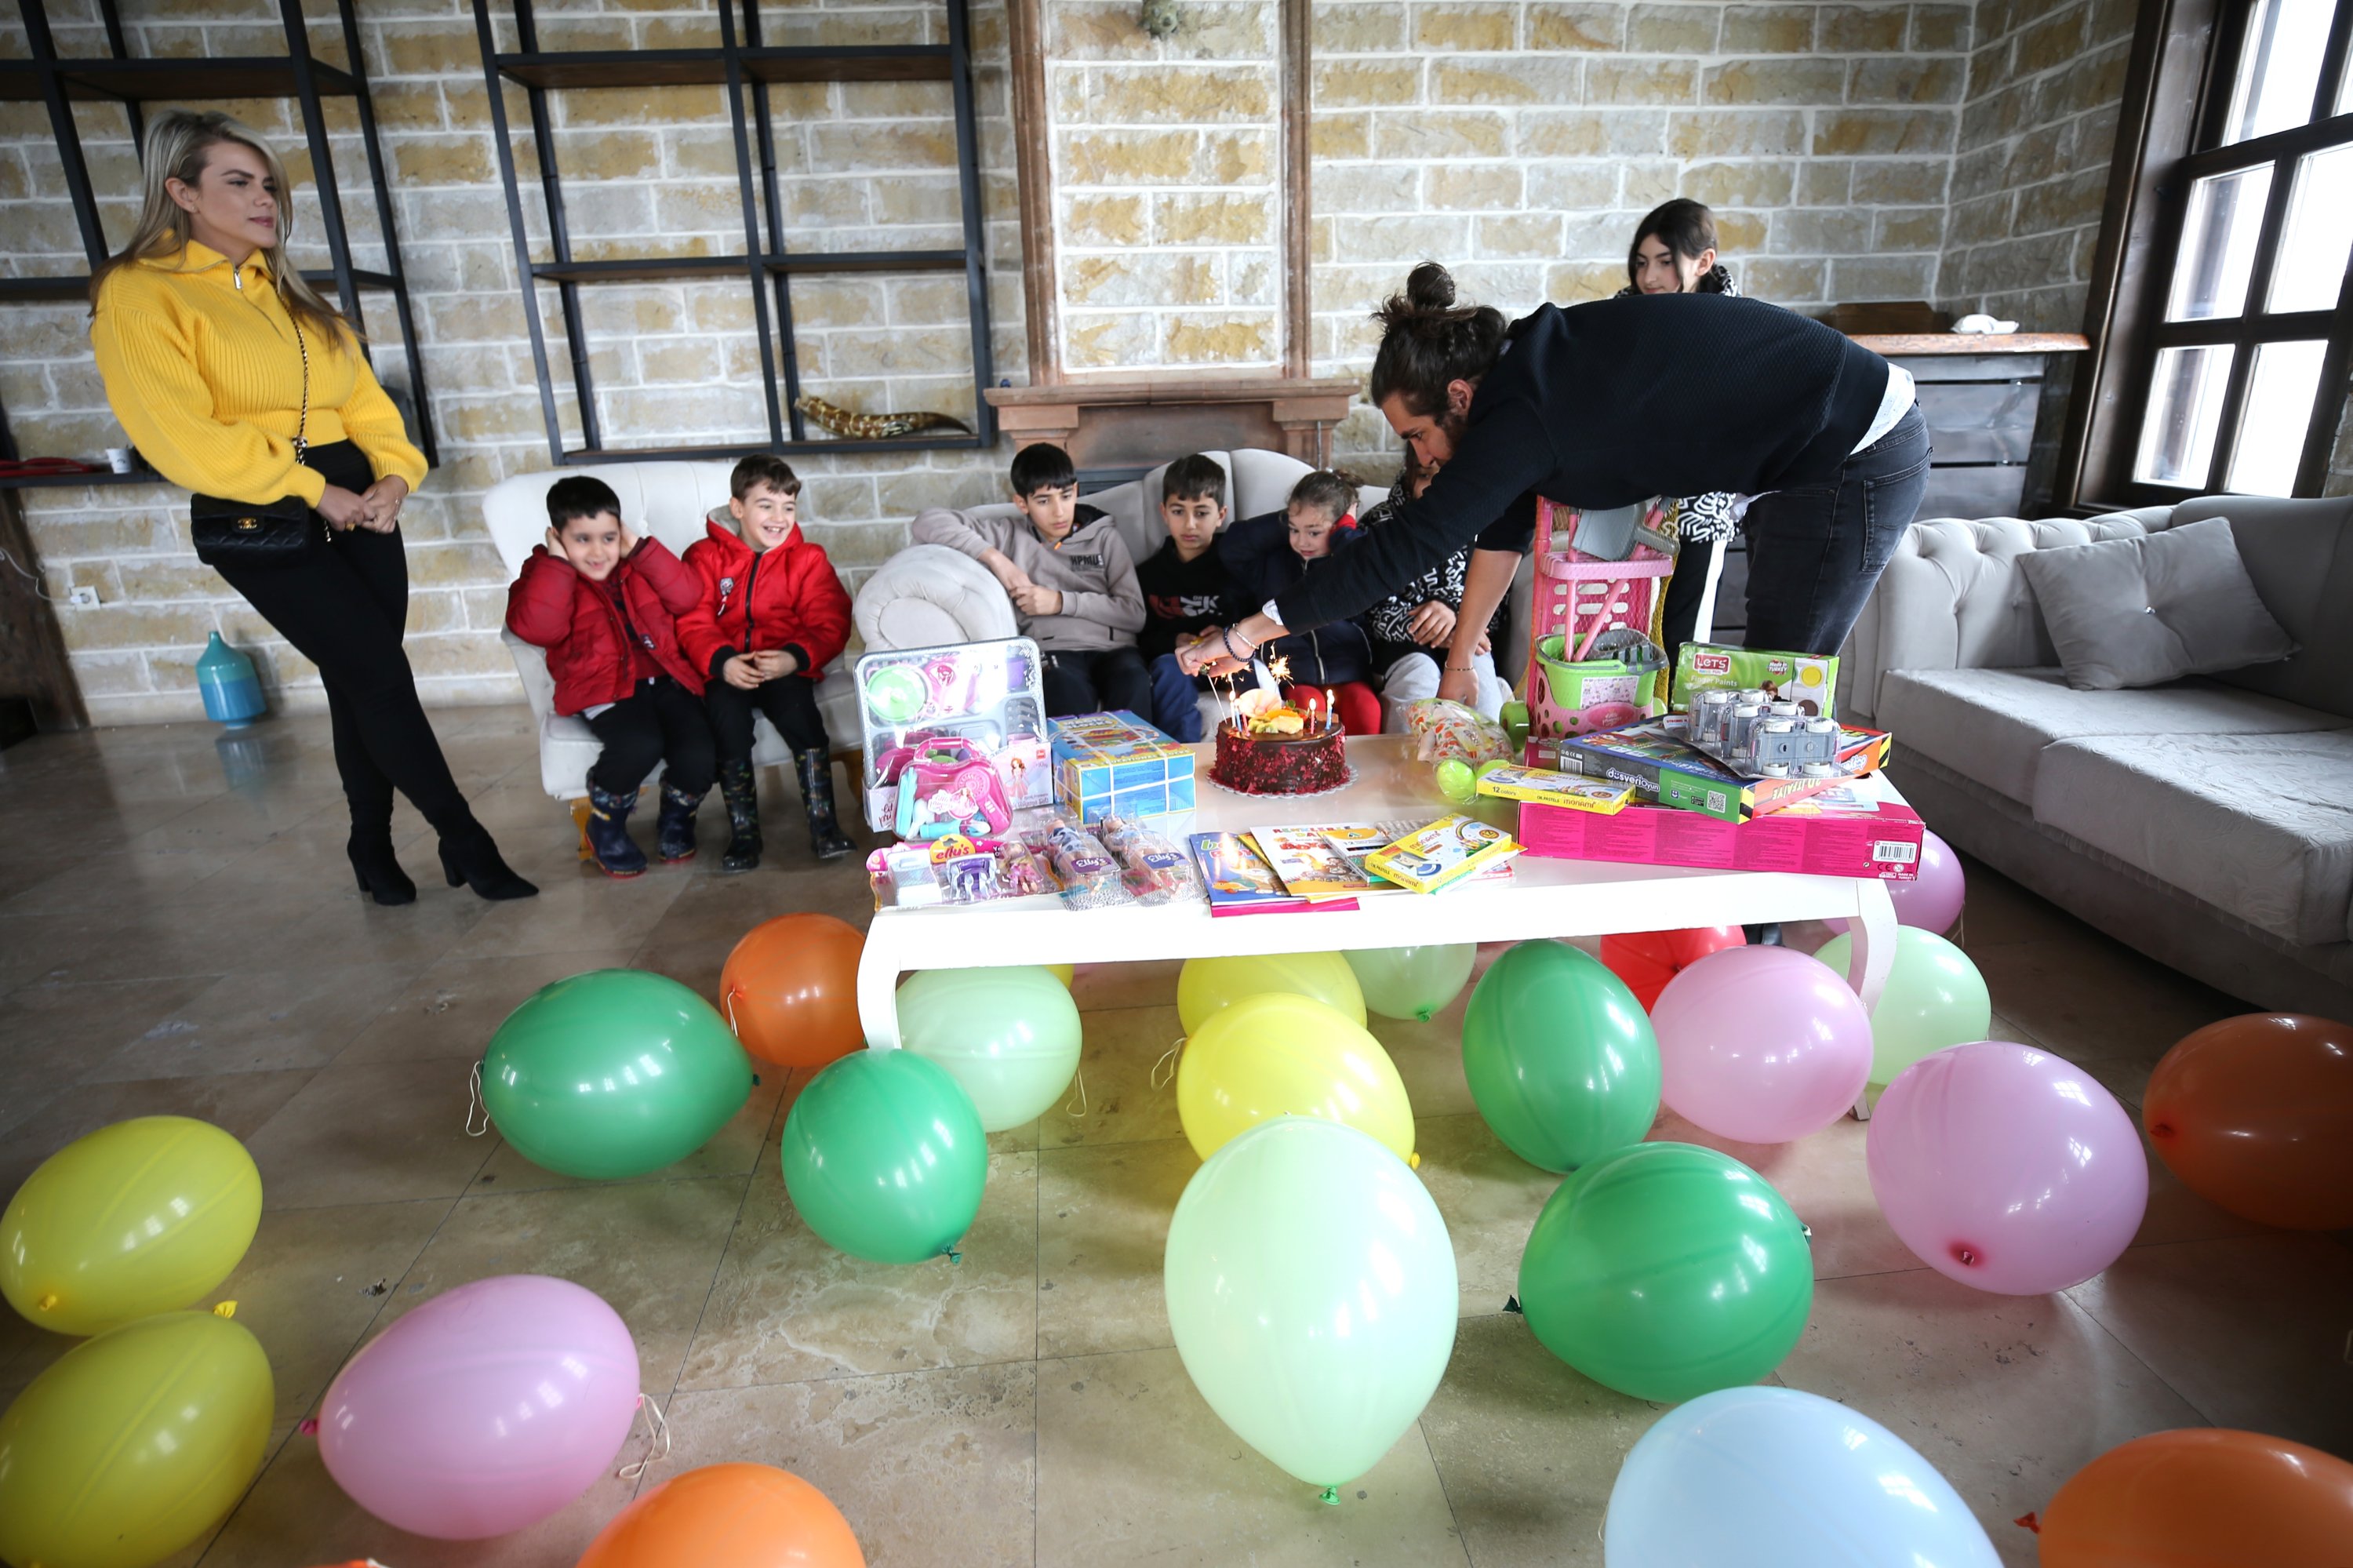 Children from the earthquake-affected provinces celebrating a birthday in Cappadocia, central Türkiye, Feb. 17, 2023. (AA Photo)